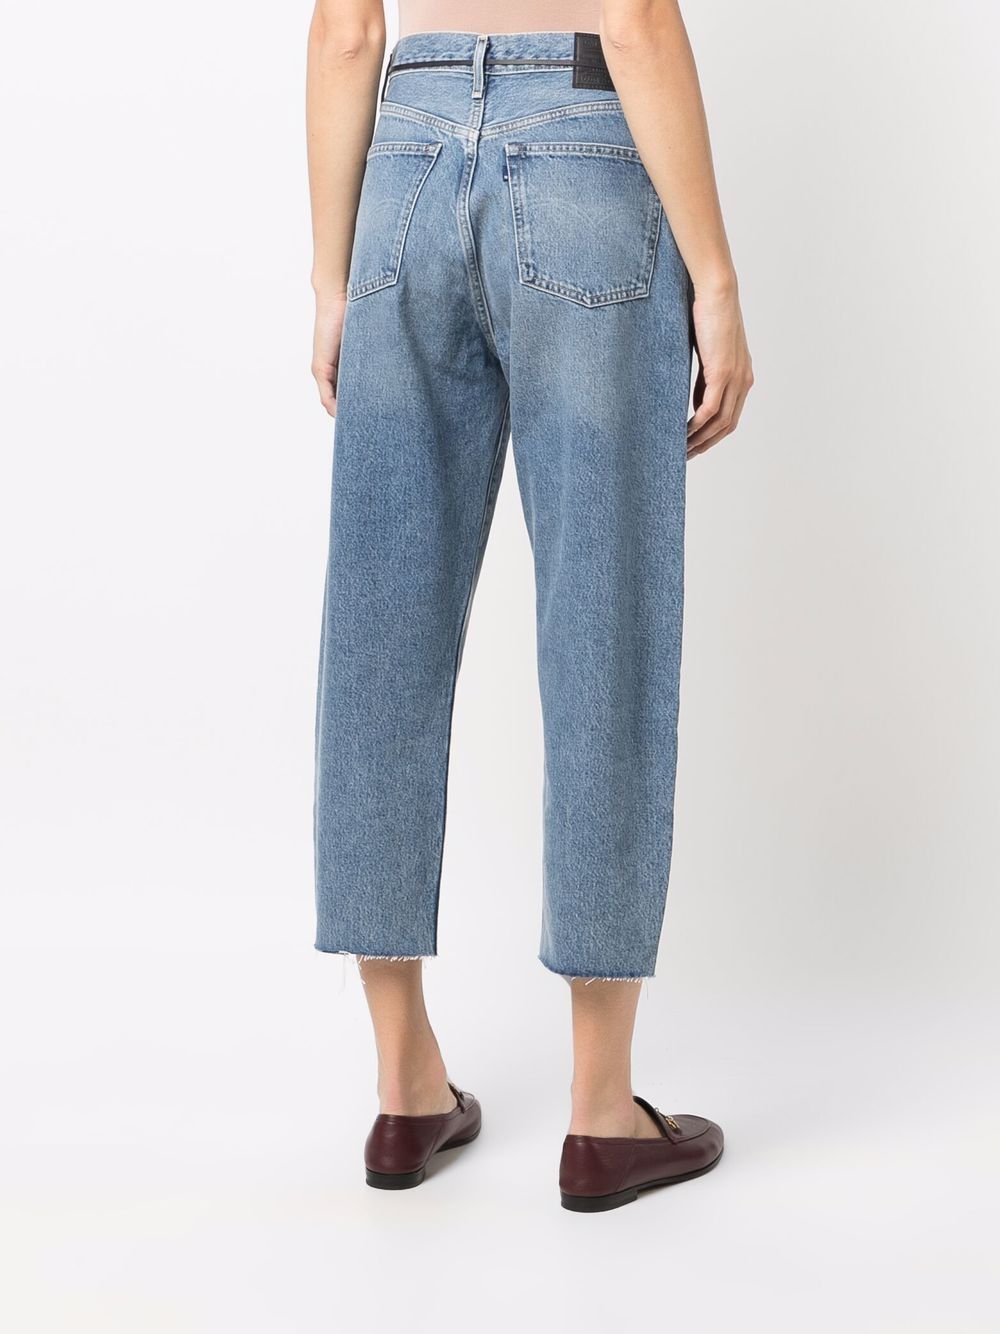 Levi's: Made & Crafted Barrel Cropped Jeans - Farfetch